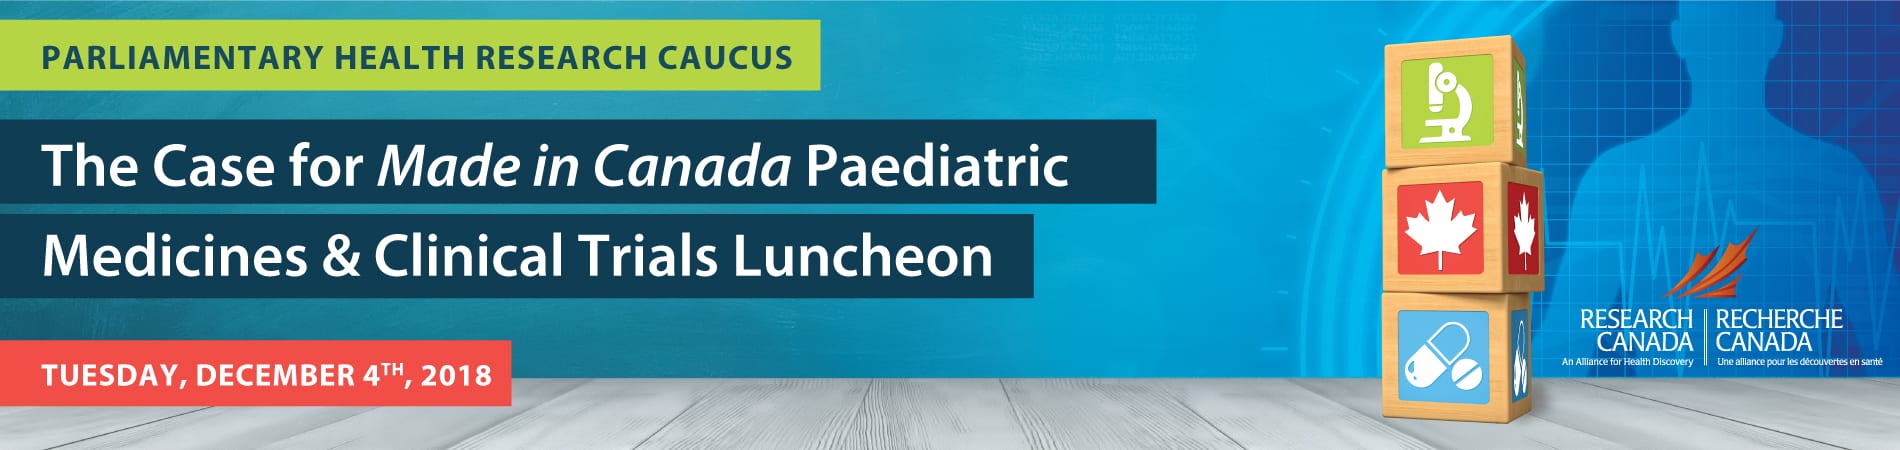 The Case for "Made in Canada" Paediatric Medicines and Clinical Trials Luncheon